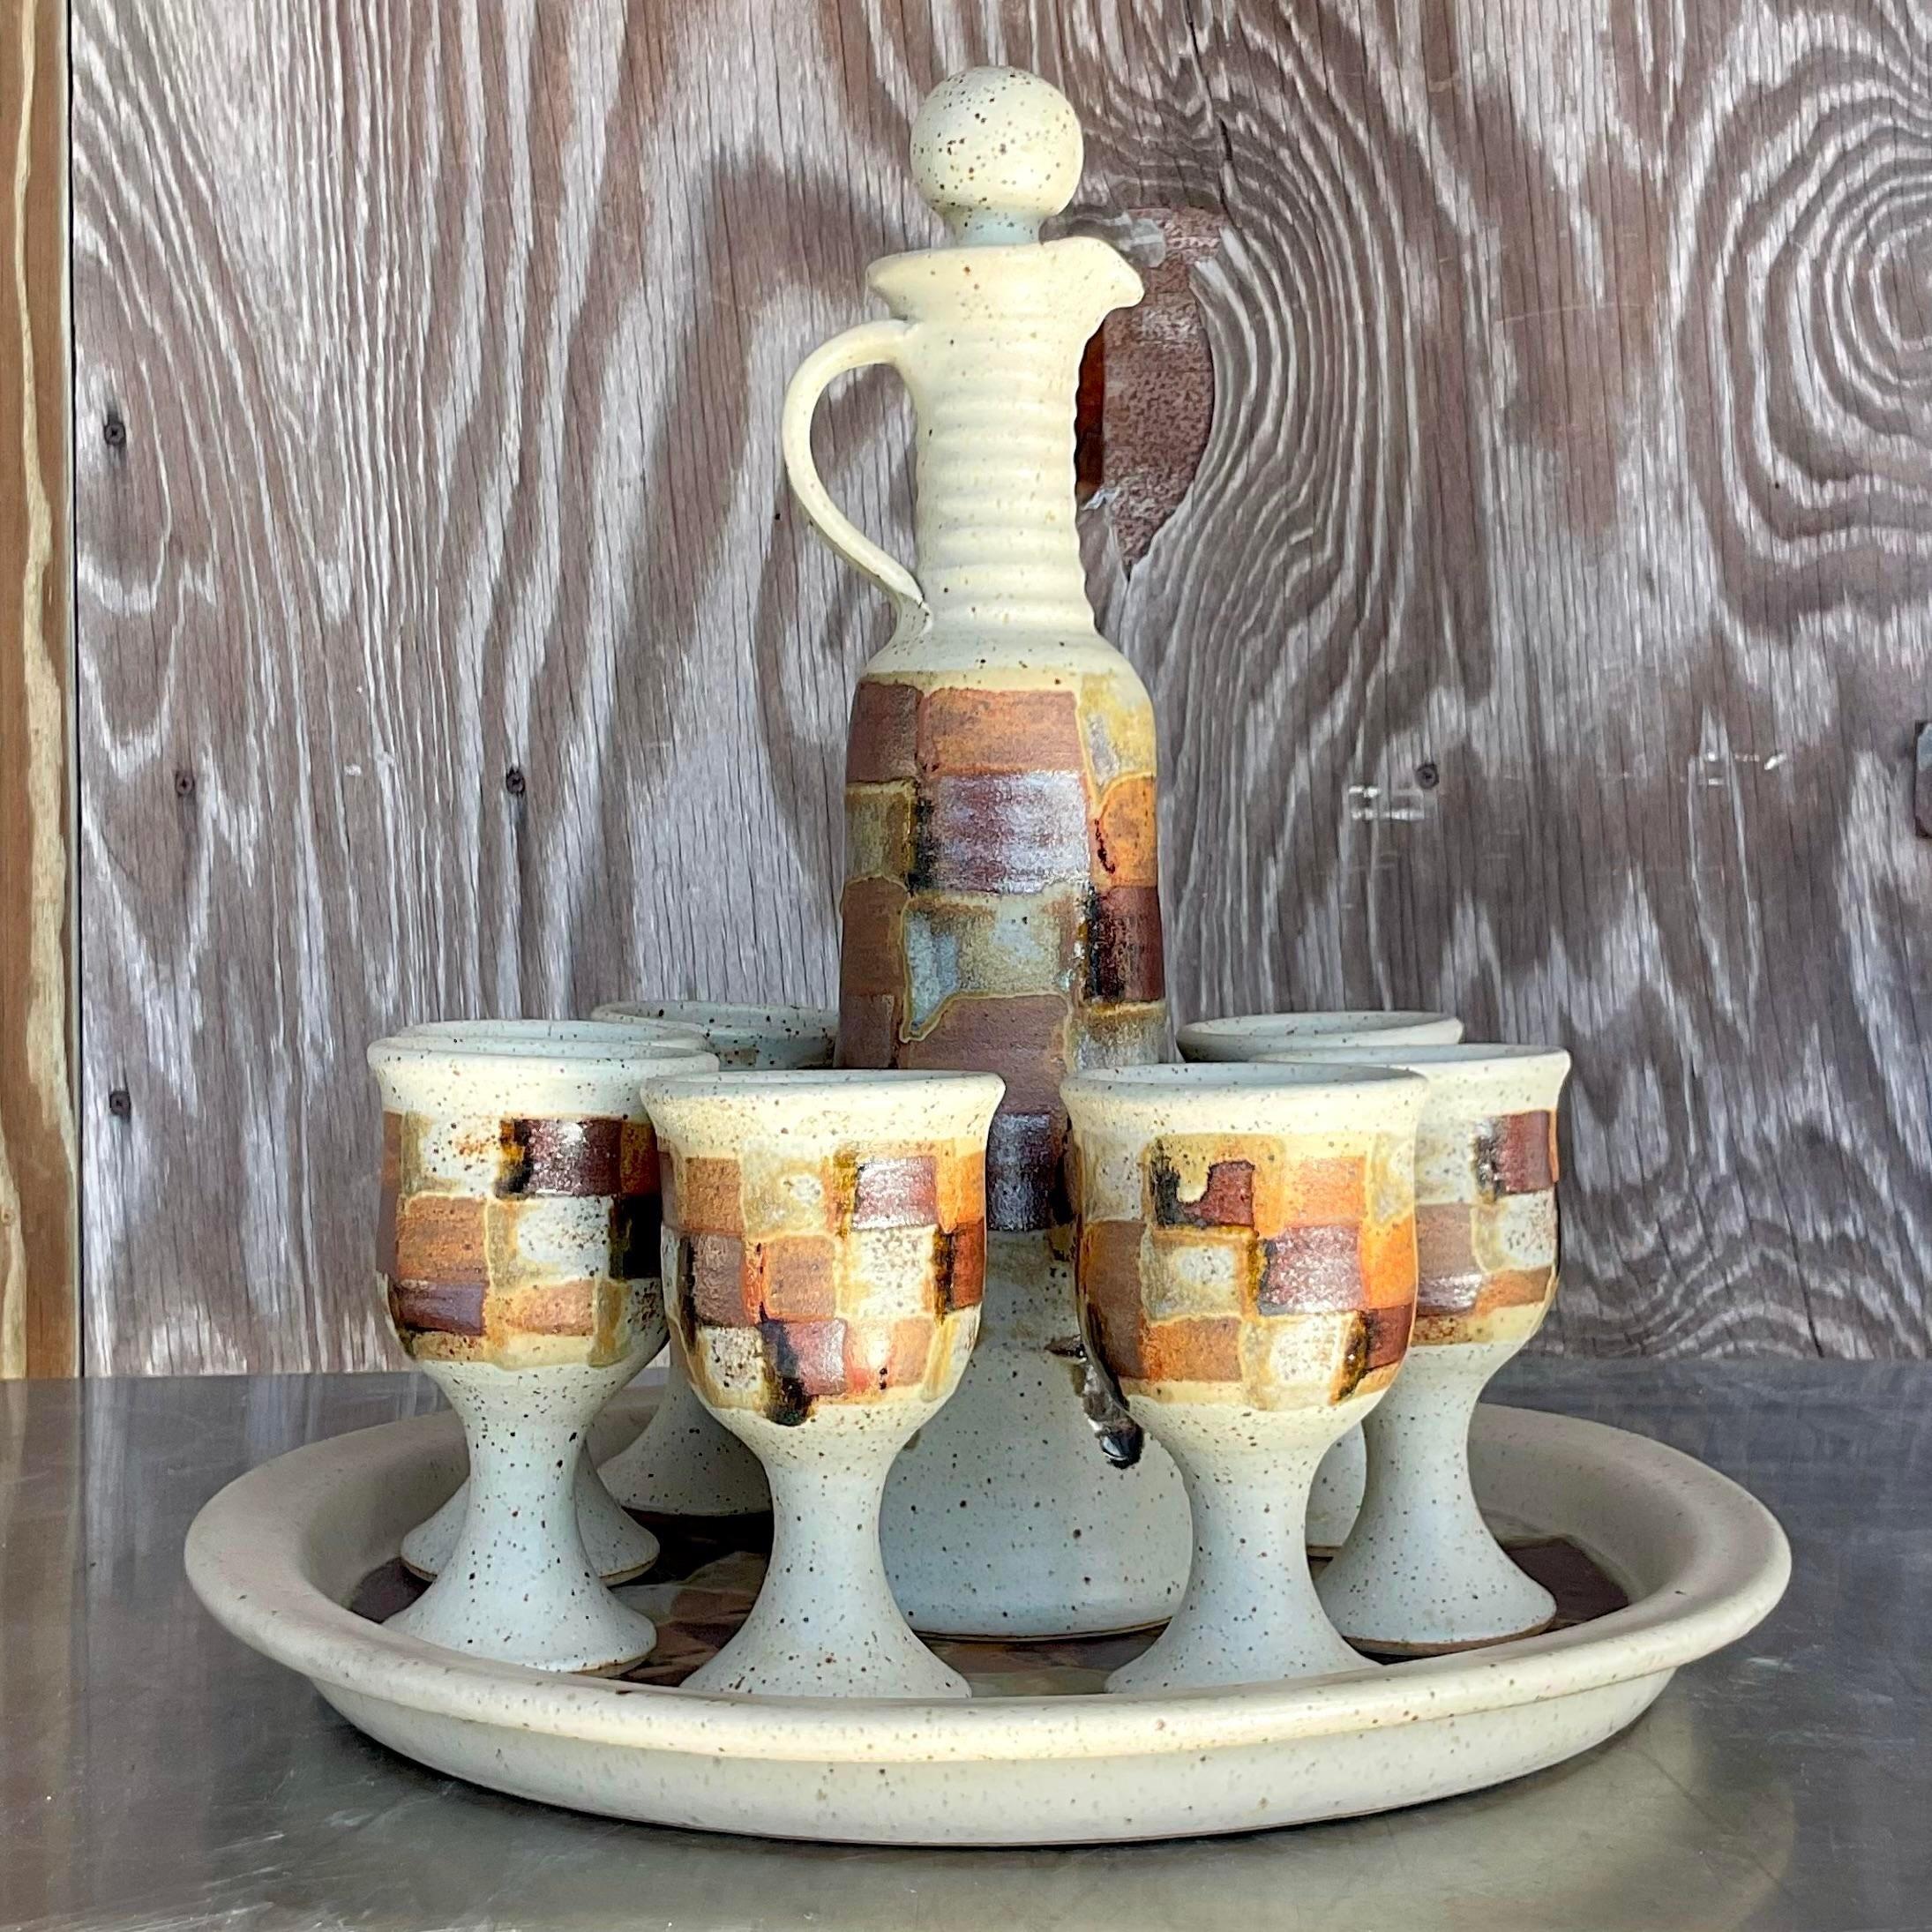 A stunning vintage Boho decanter set. A chic hand painted checkerboard in deep warm colors. A beautiful tall carafe with 8 matching goblets and coordinating tray. Acquired from a Palm Beach estate.

Platter size 16x16x1.5
Goblet size 3.25x3.25x5.75